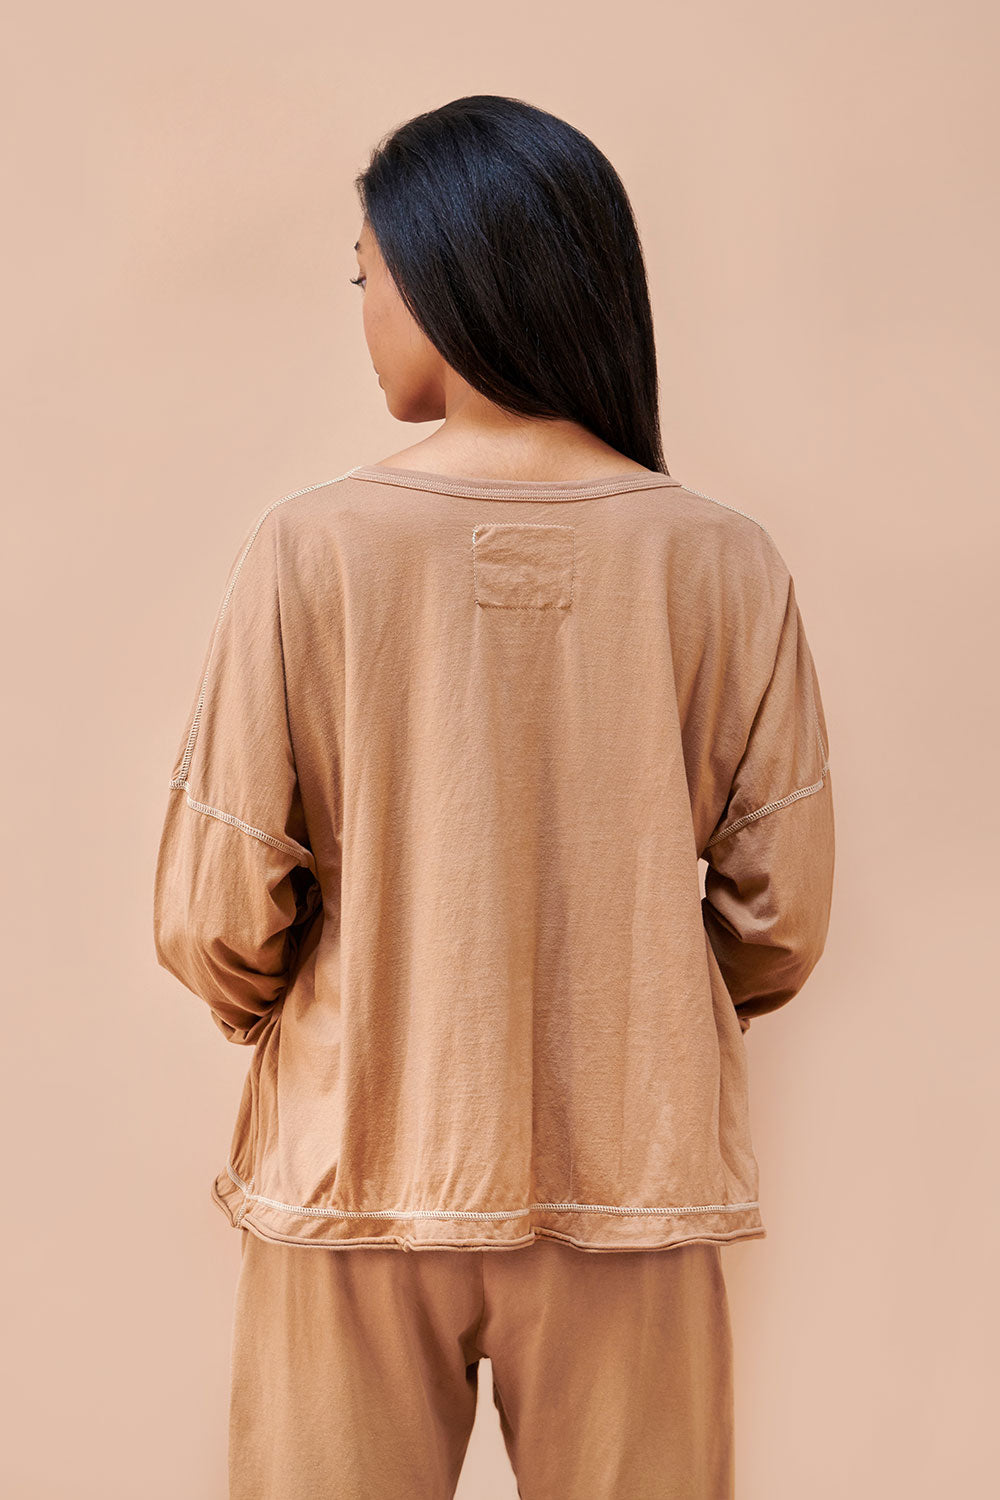 Alabama Chanin Coverup with long sleeves, shown in Camel color on model.